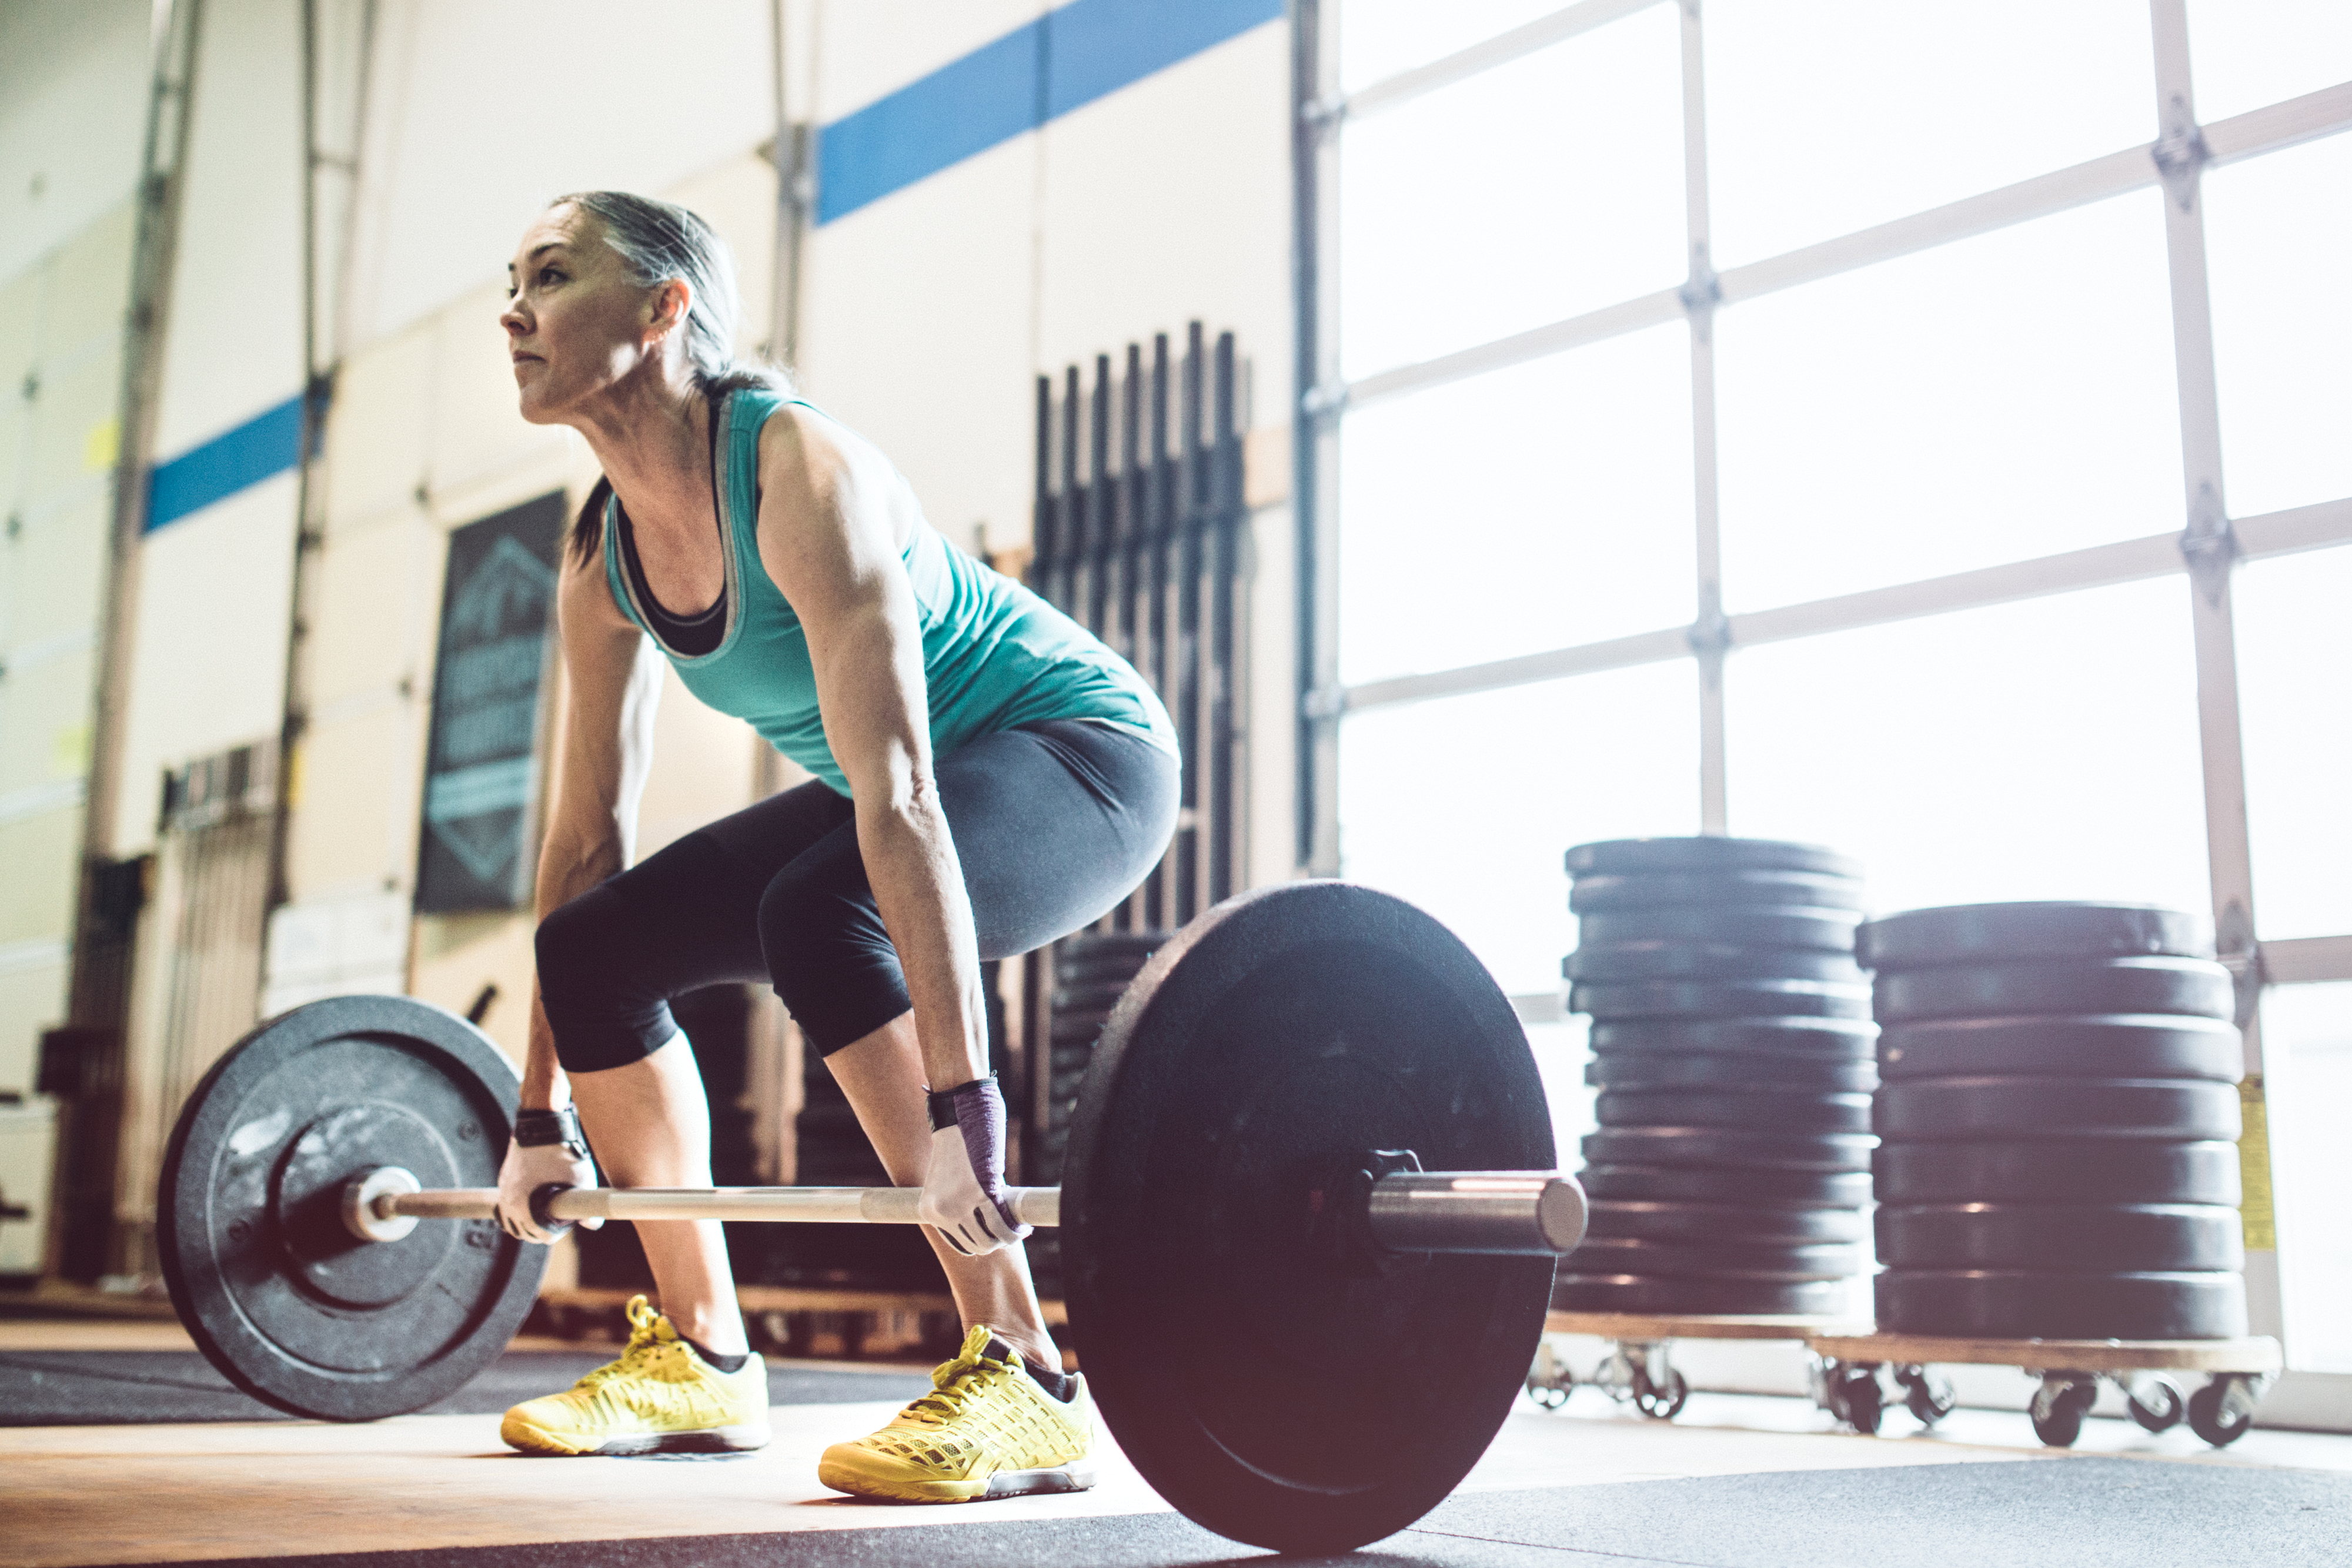 Woman prepares to lift a barbell at the gym